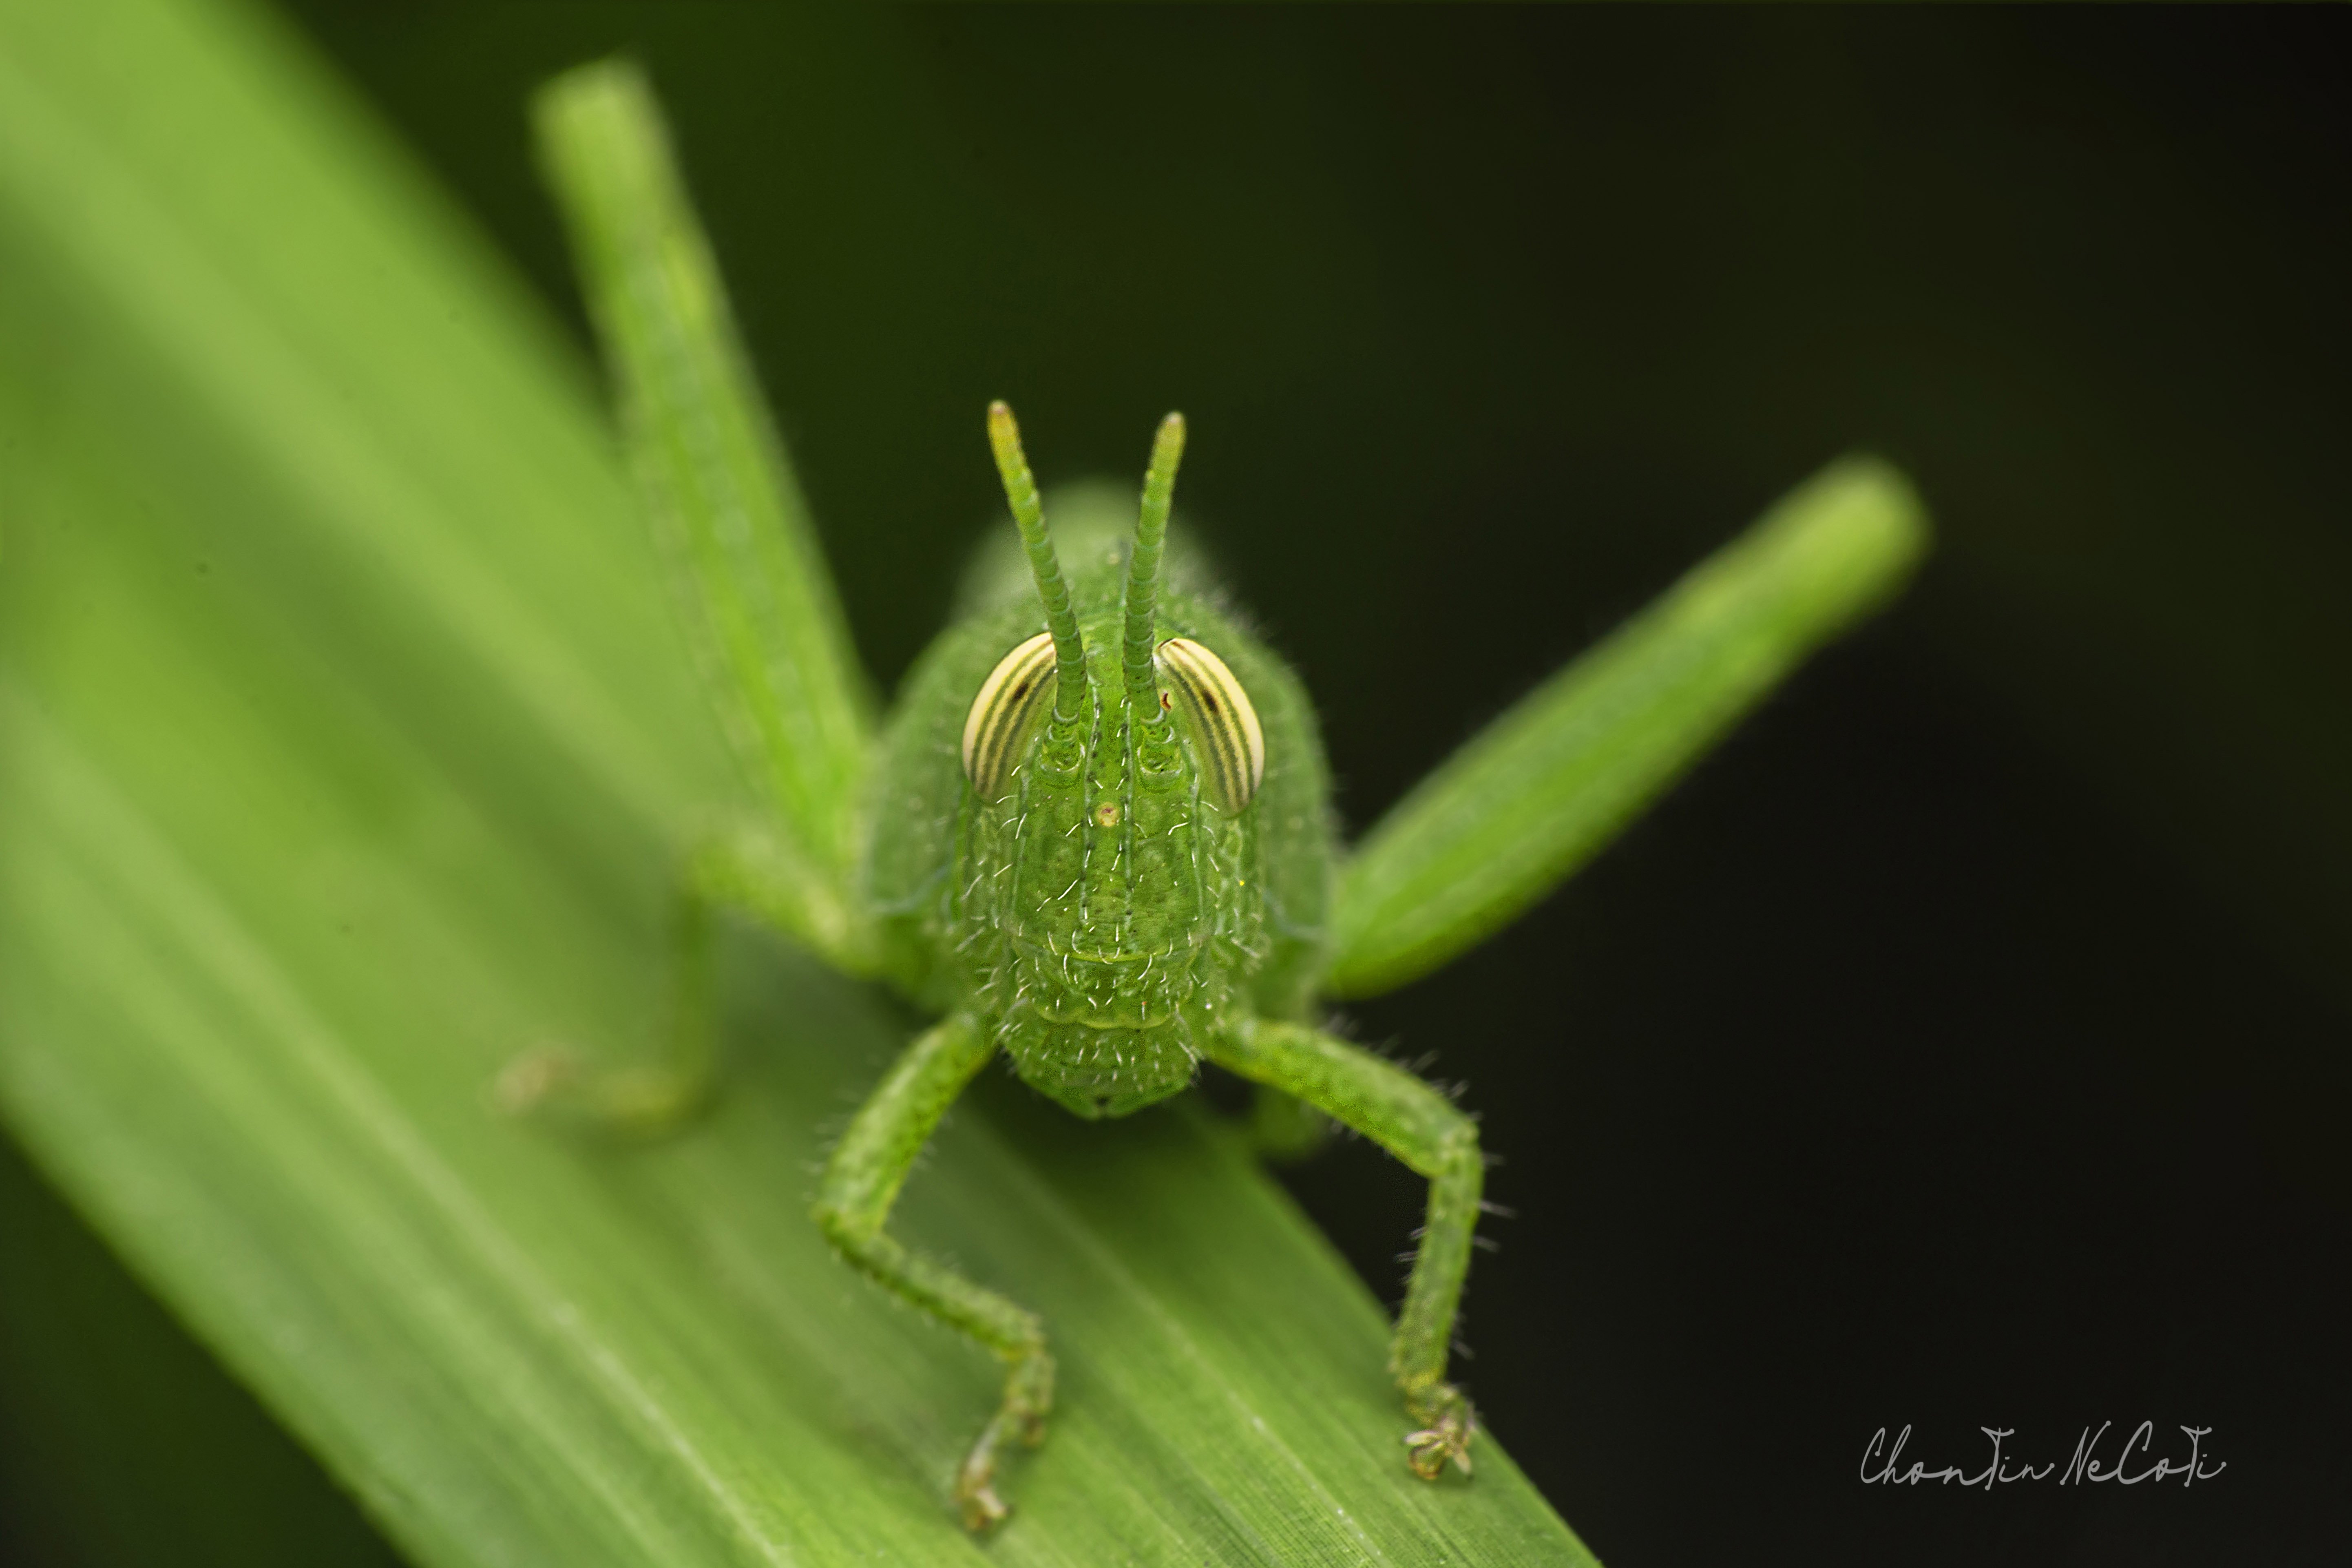 grass, hopper, green, macro, leaf, background nature, animal summer, grass, natural, insect close up, closeup, life color, meadow, white plant, detail, wildlife, garden, environment, bug beautiful, jump, blurrypest, brown, one, spring, outdoor, day, vieww, NeCoTi ChonTin